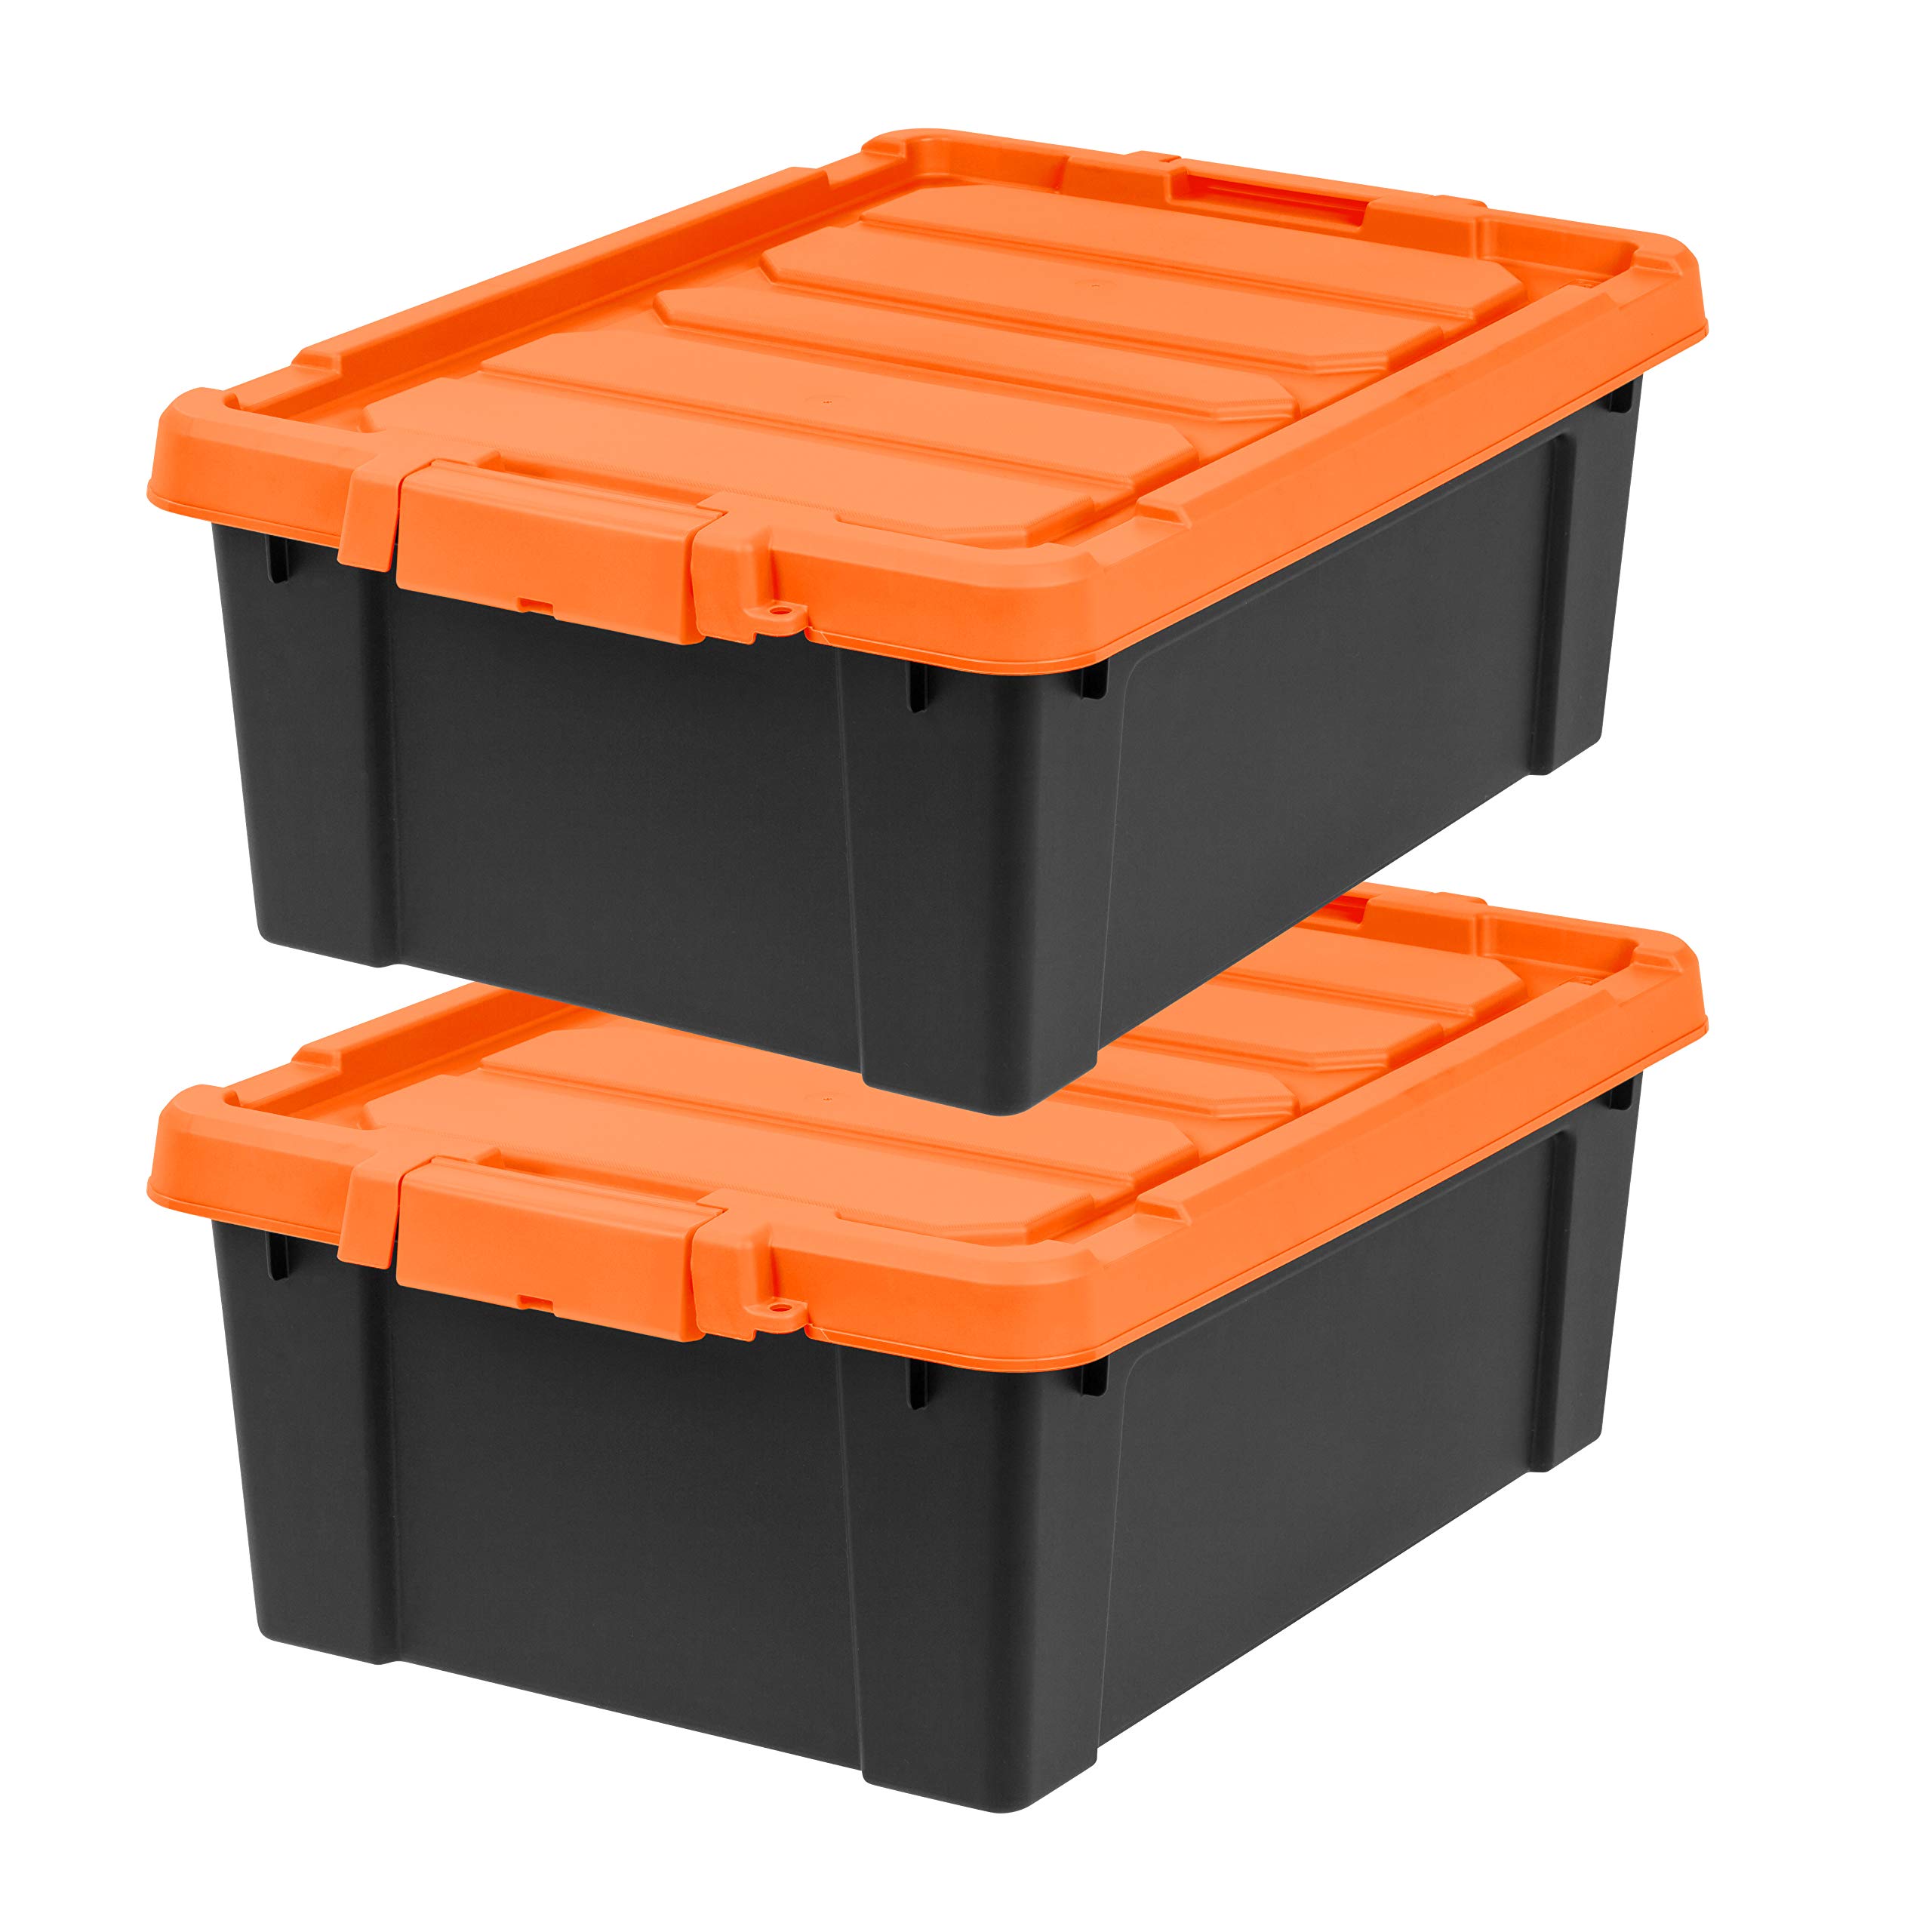 IRIS USA 11.75 Gallon Heavy-Duty Plastic Storage Bins, 2 Pack, Store-It-All Container Totes with Durable Lid and Secure Latching Buckles, Garage and Metal Rack Organizing, Black/Orange